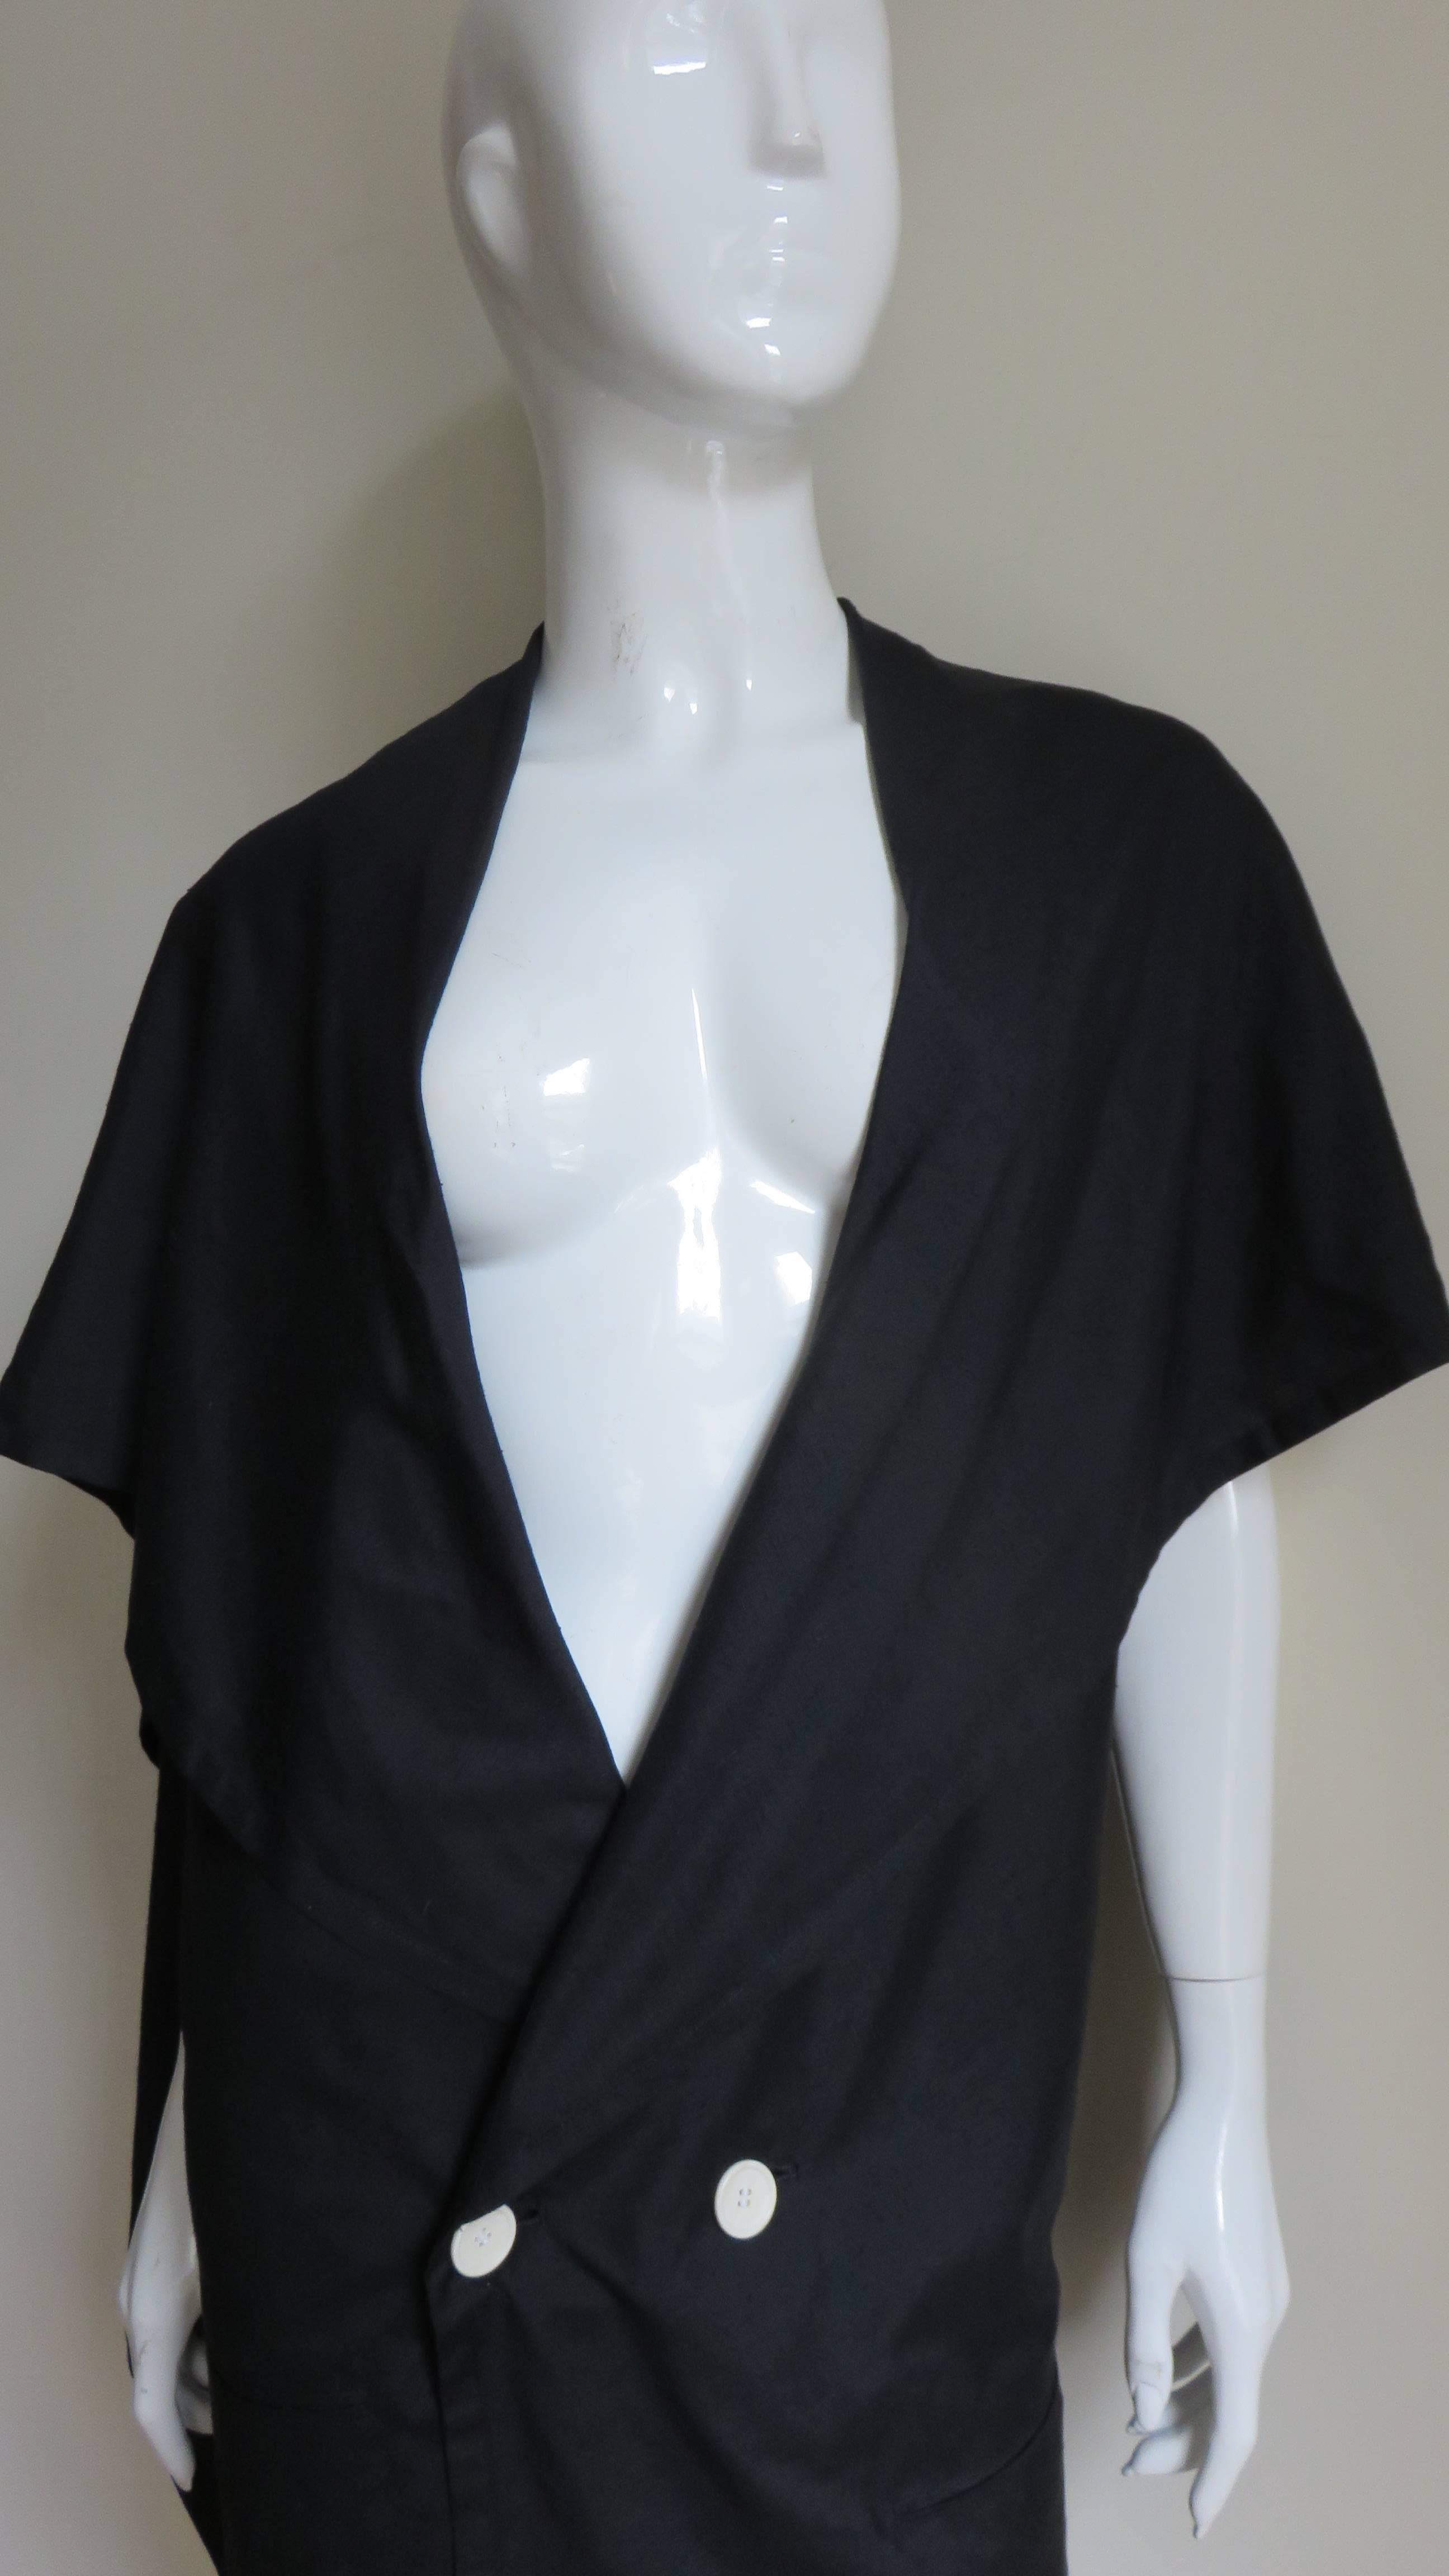 A fabulous black silk jacket from Yohji Yamamoto.  It is double breasted with a collar that asymmetrically drapes over the shoulders and upper arms forming a panel at the back.  It has 2 front hip welt pockets and is unlined.  
Fits sizes Small,